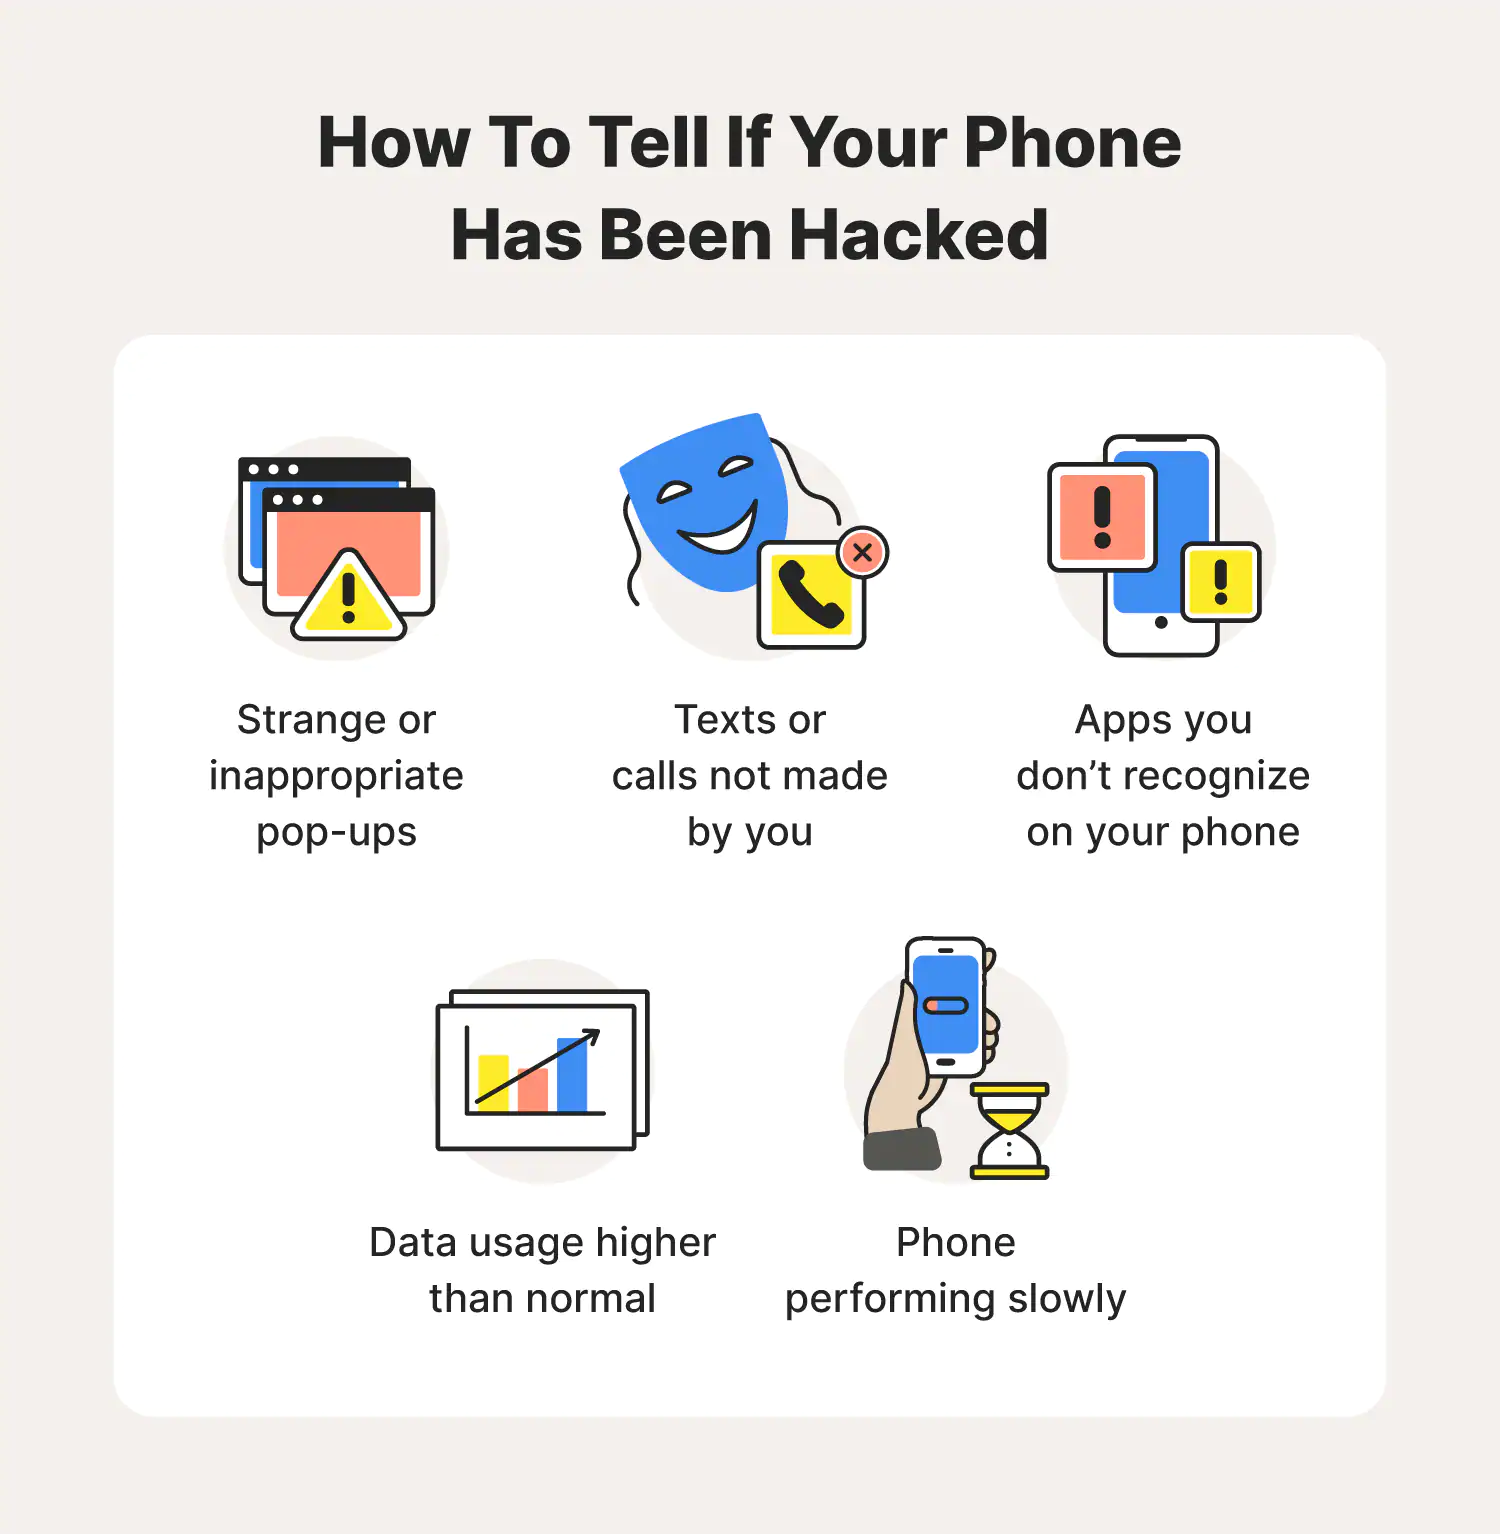 How do you know if your phone has been hacked?